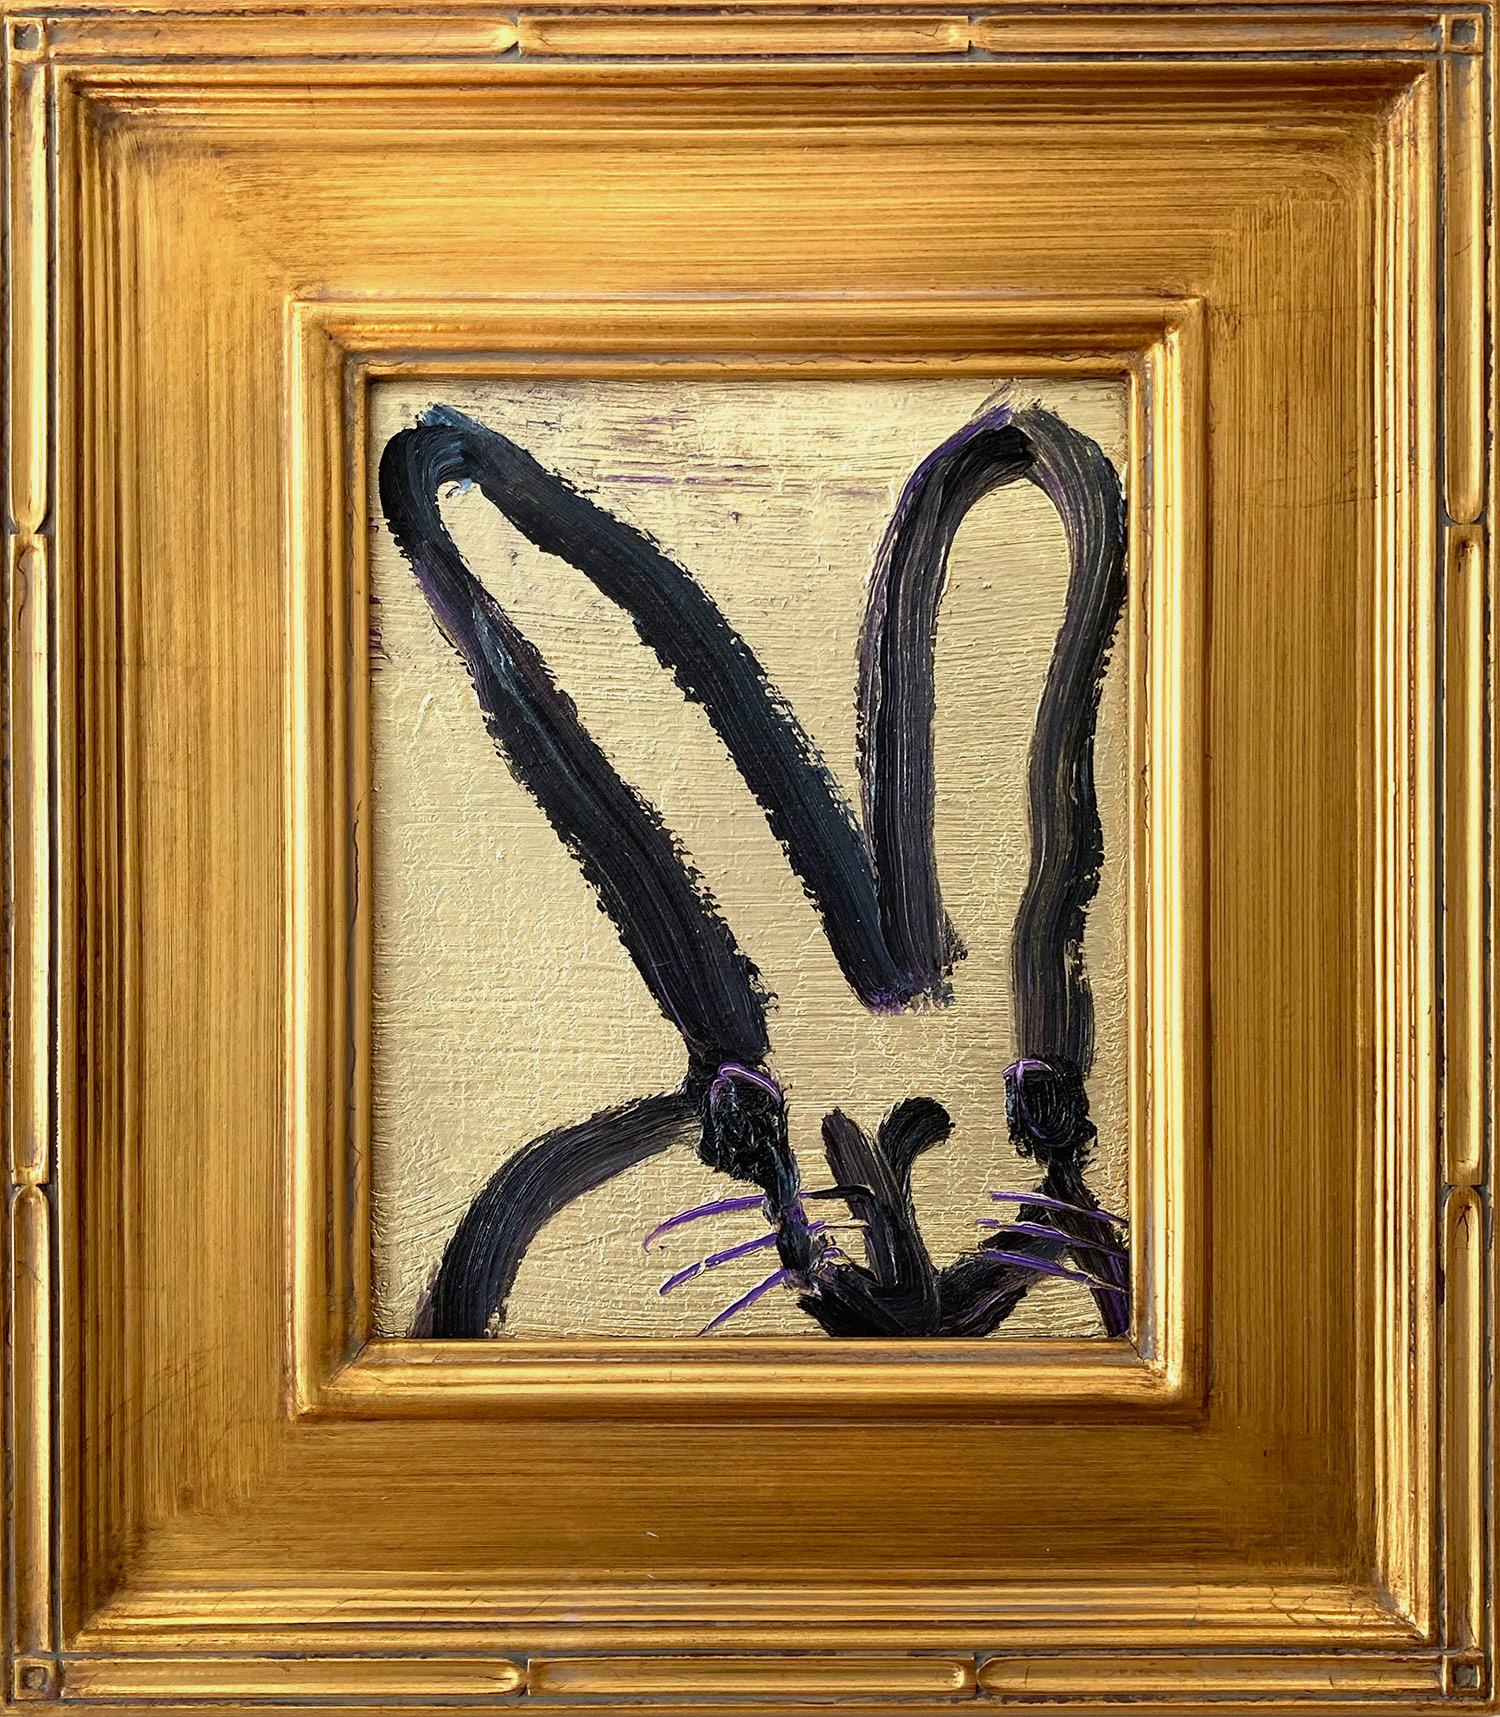 Hunt Slonem Animal Painting - "Monk" Black Bunny on Gold Background with Purple Accents Oil Painting on Wood